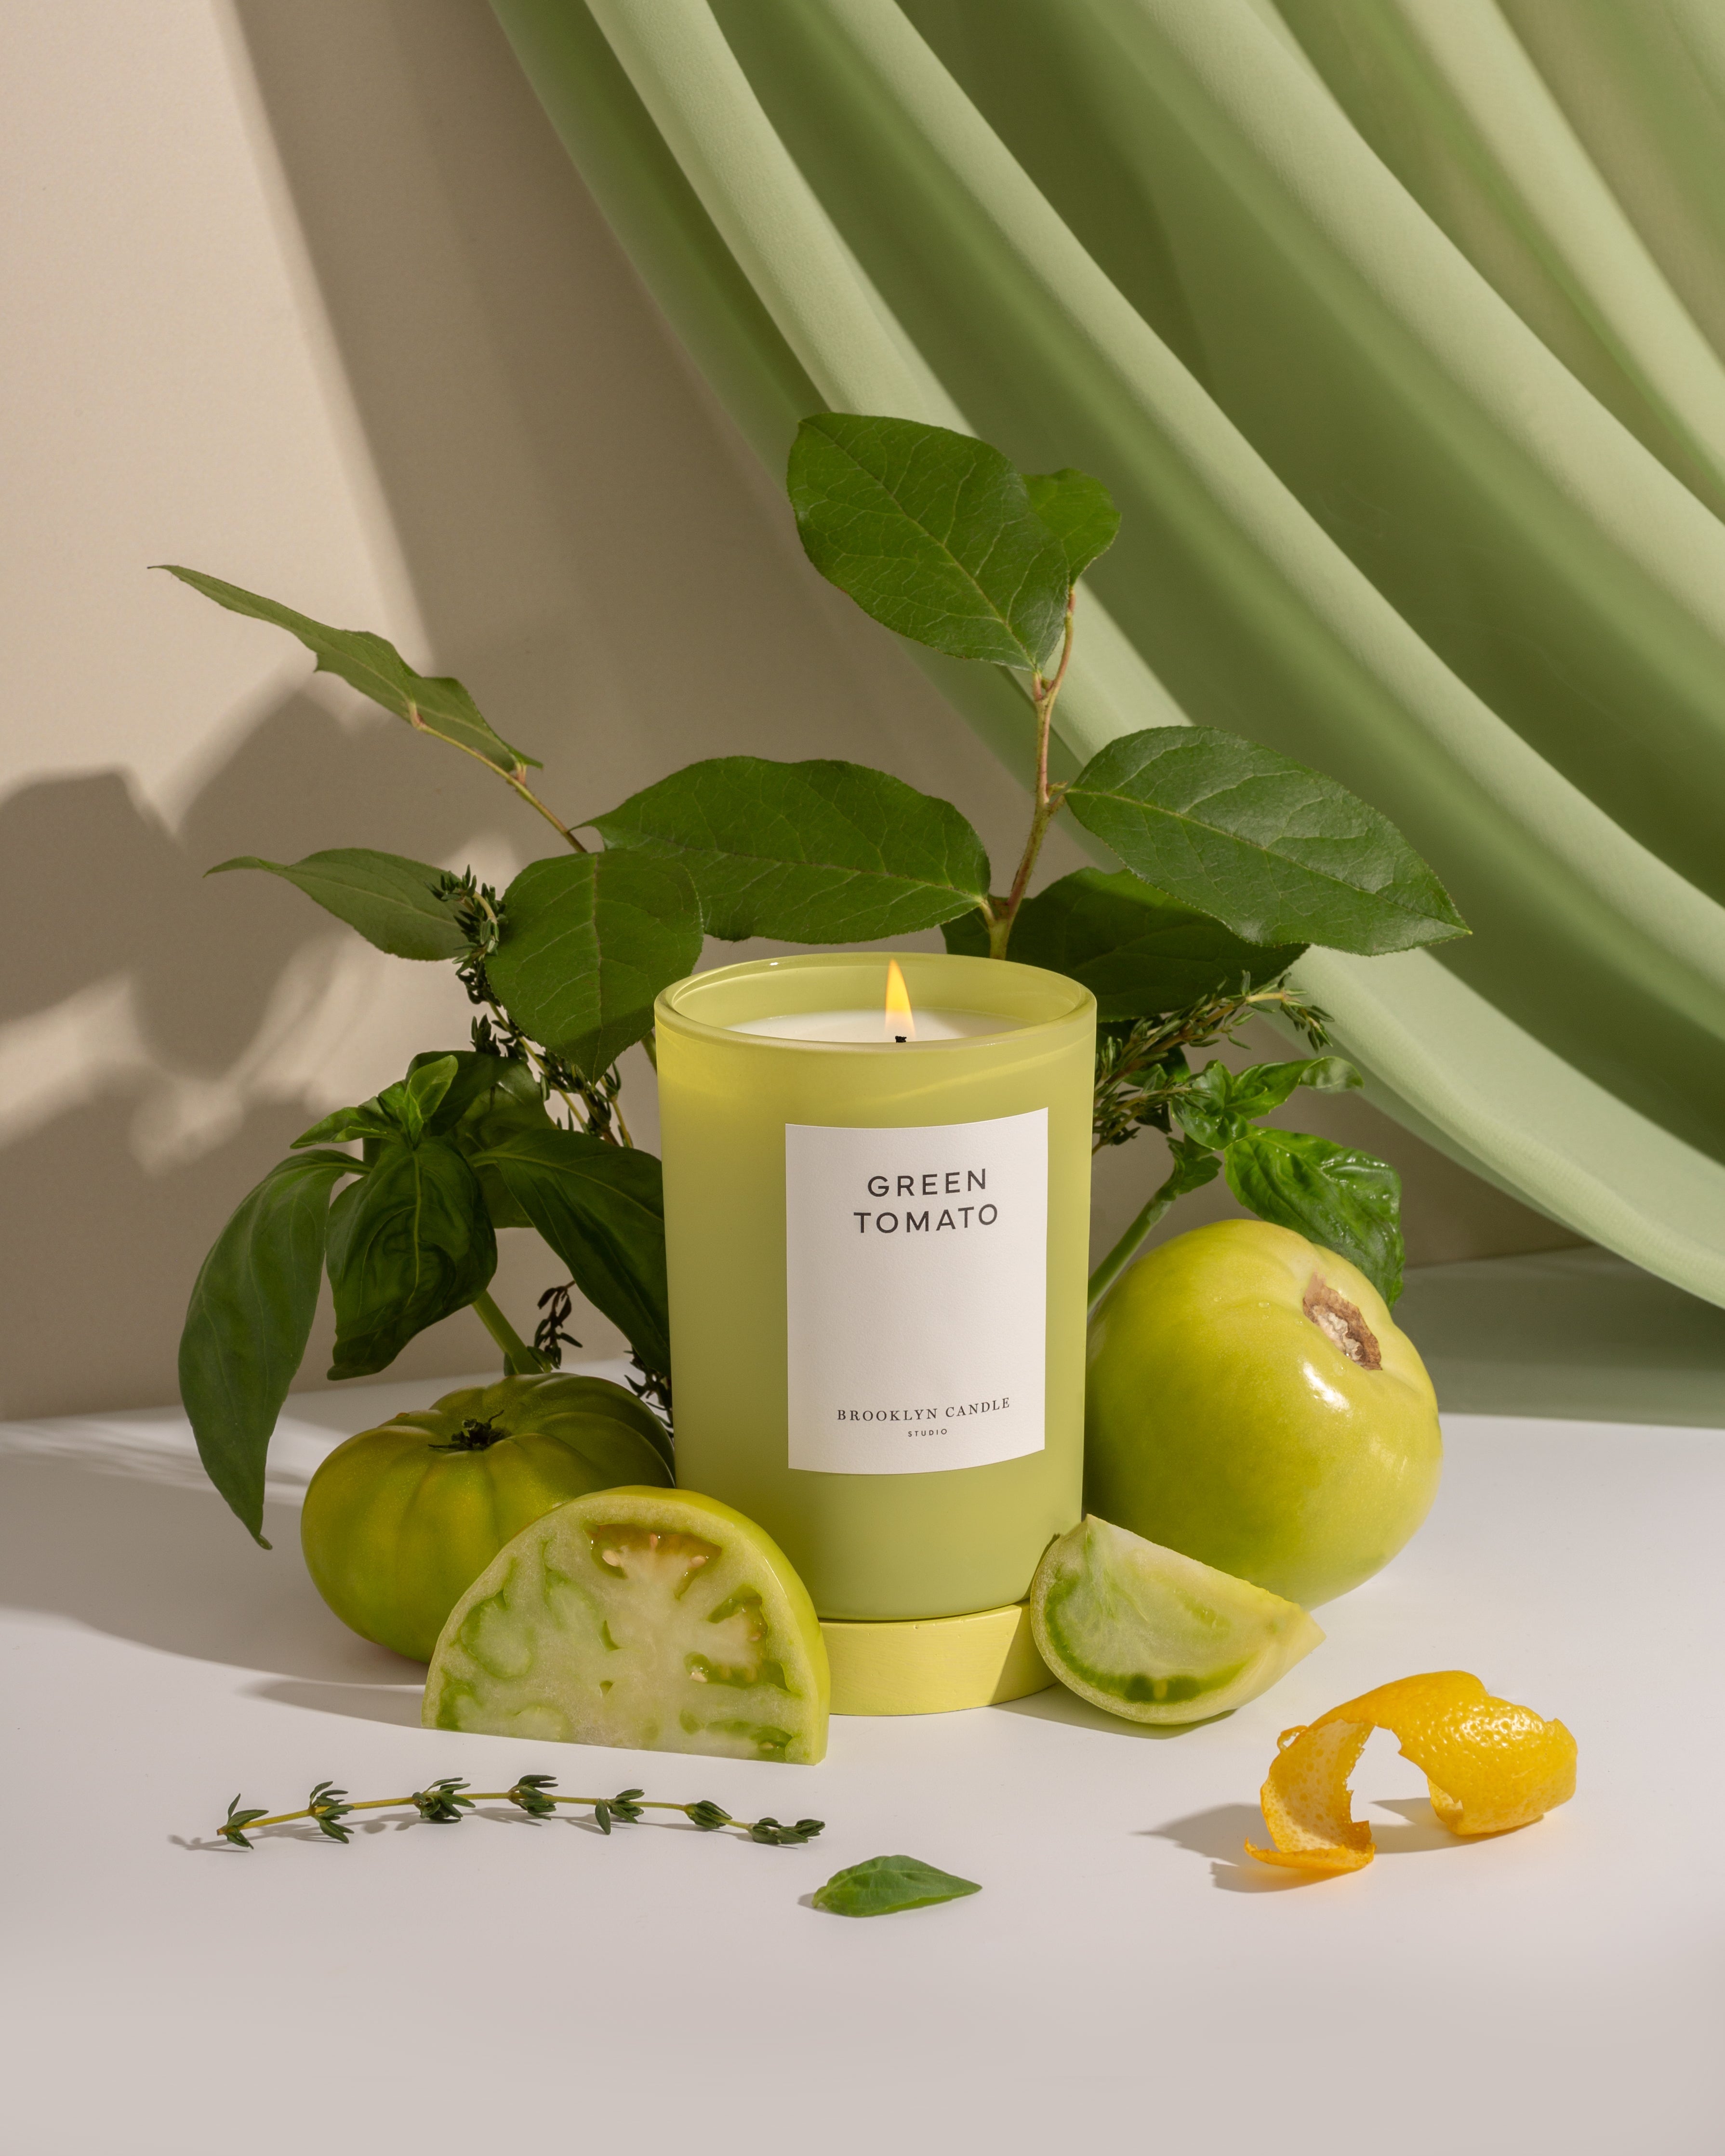 Green Tomato Limited Edition Candle Herbarium Collection Brooklyn Candle Studio 